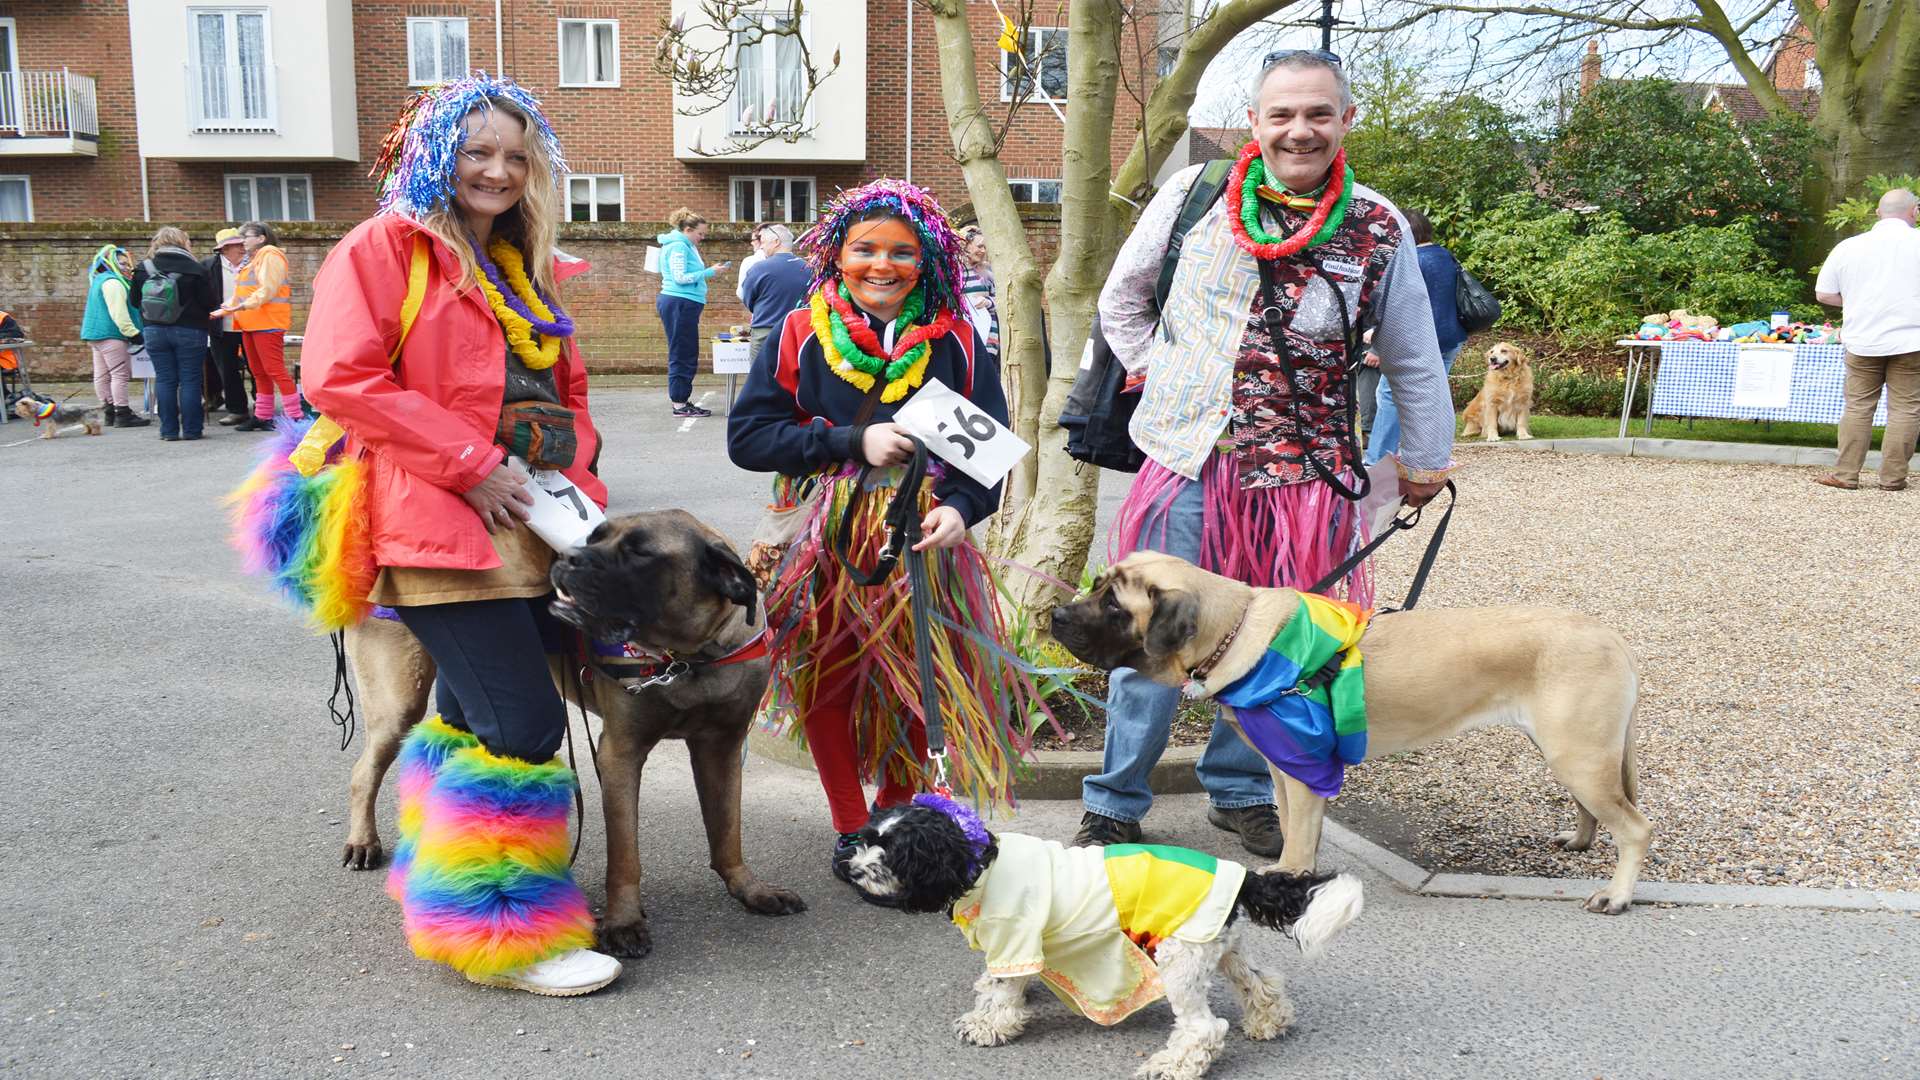 Tracey Carby, Kirsten Williams, James Rutty with dogs Brian, Maggie and Geanie from Hoath taking part in the Rainbow Ride and Stride in 2014